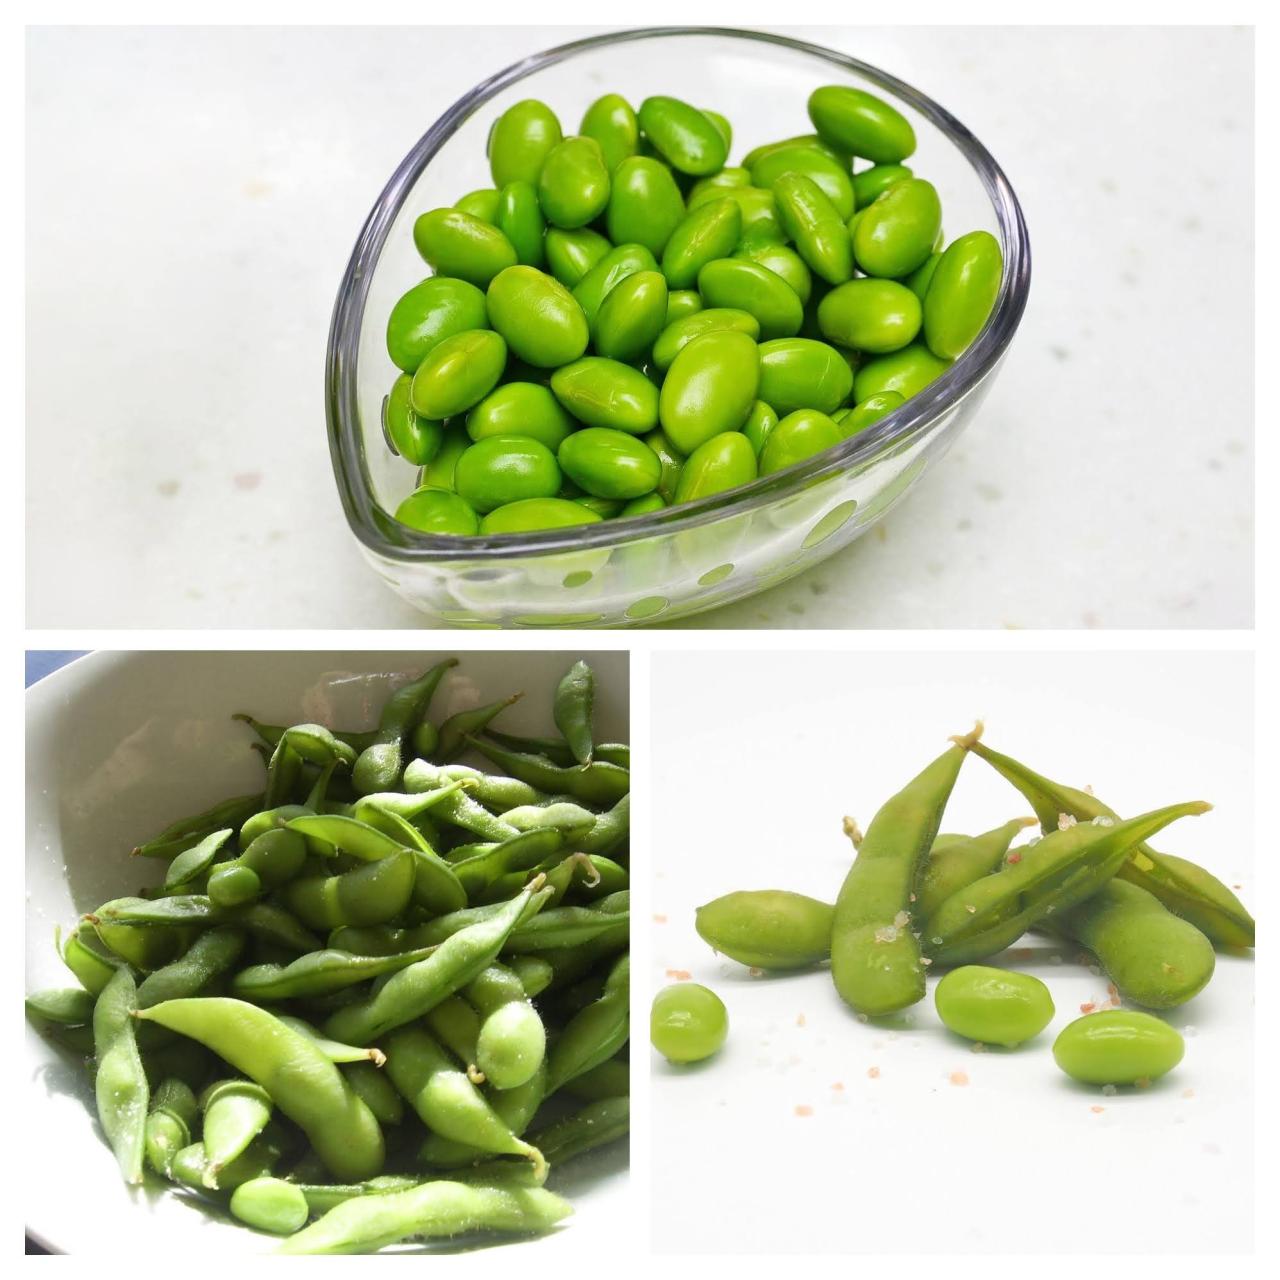 soybean-g42f916187_1920-COLLAGE (1)